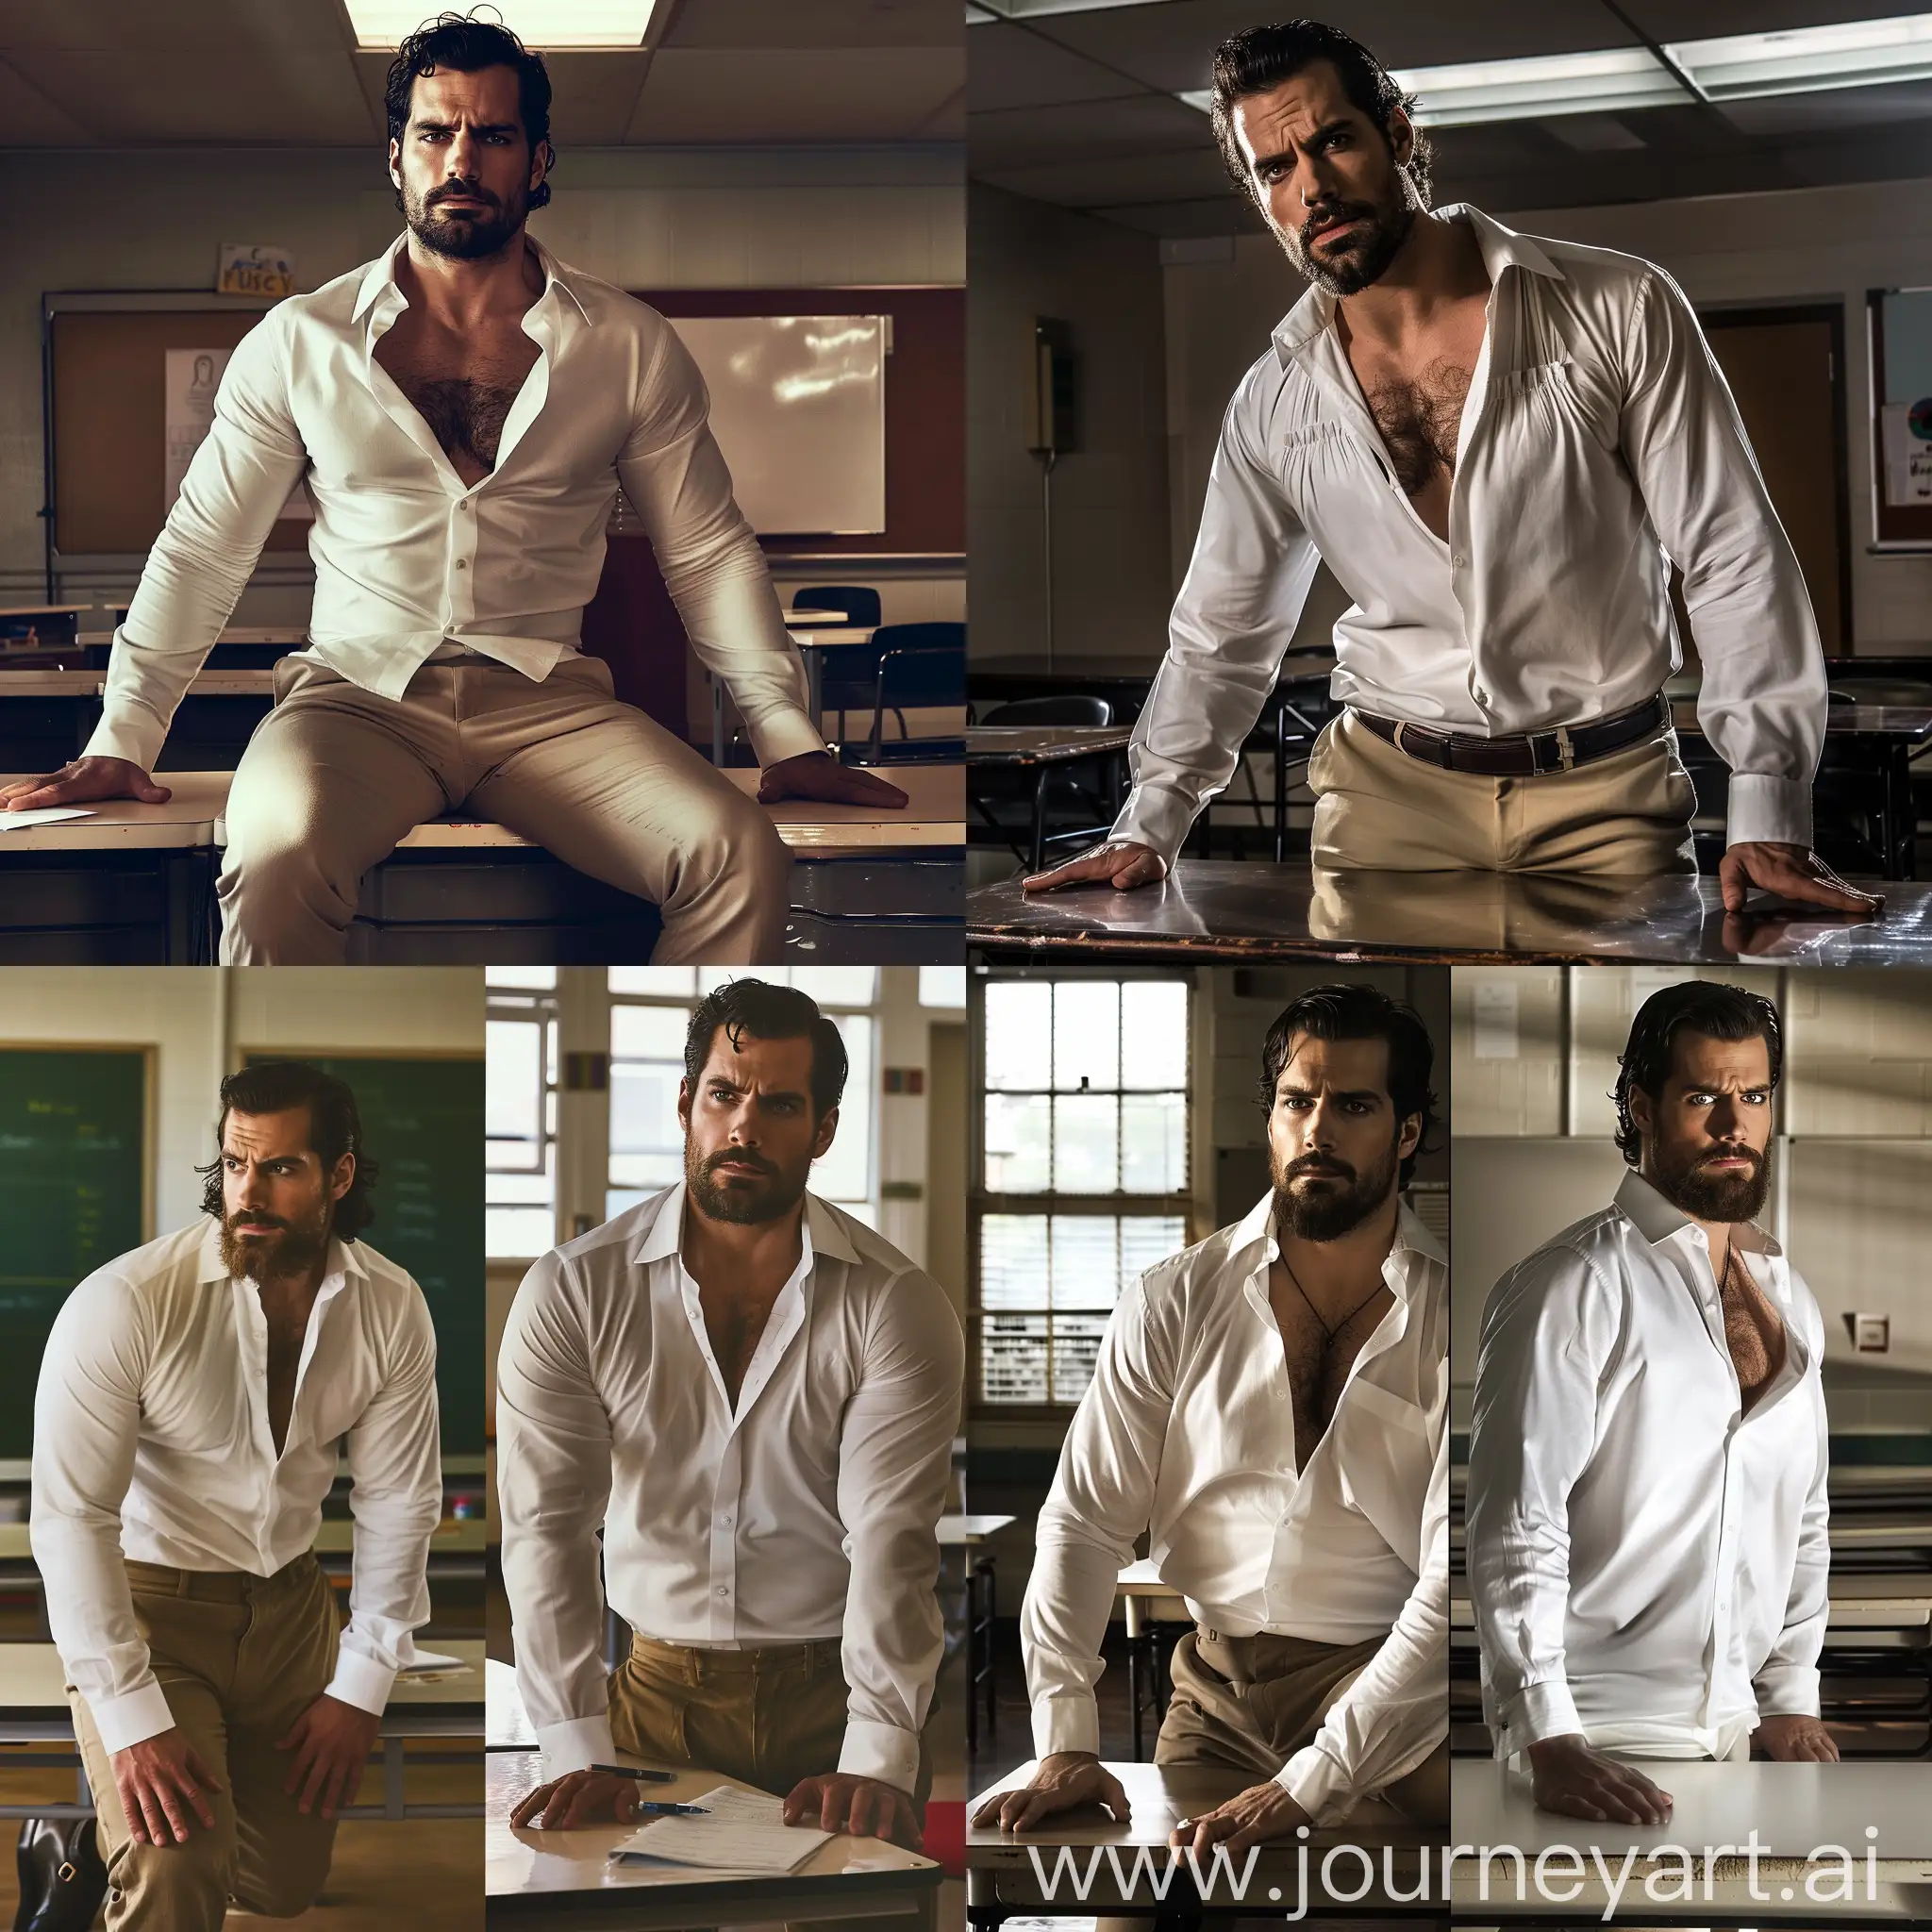 cinematic lighting, good looking burly Henry Cavill as a teacher, wearing a white open dress shirt, bearded handsome muscular Henry Cavill wearing a white dress shirt, hairy chest, standing and sitting on his table, wearing a tight white dress shirt and khaki pants, wearing black leather shoes, classroom background